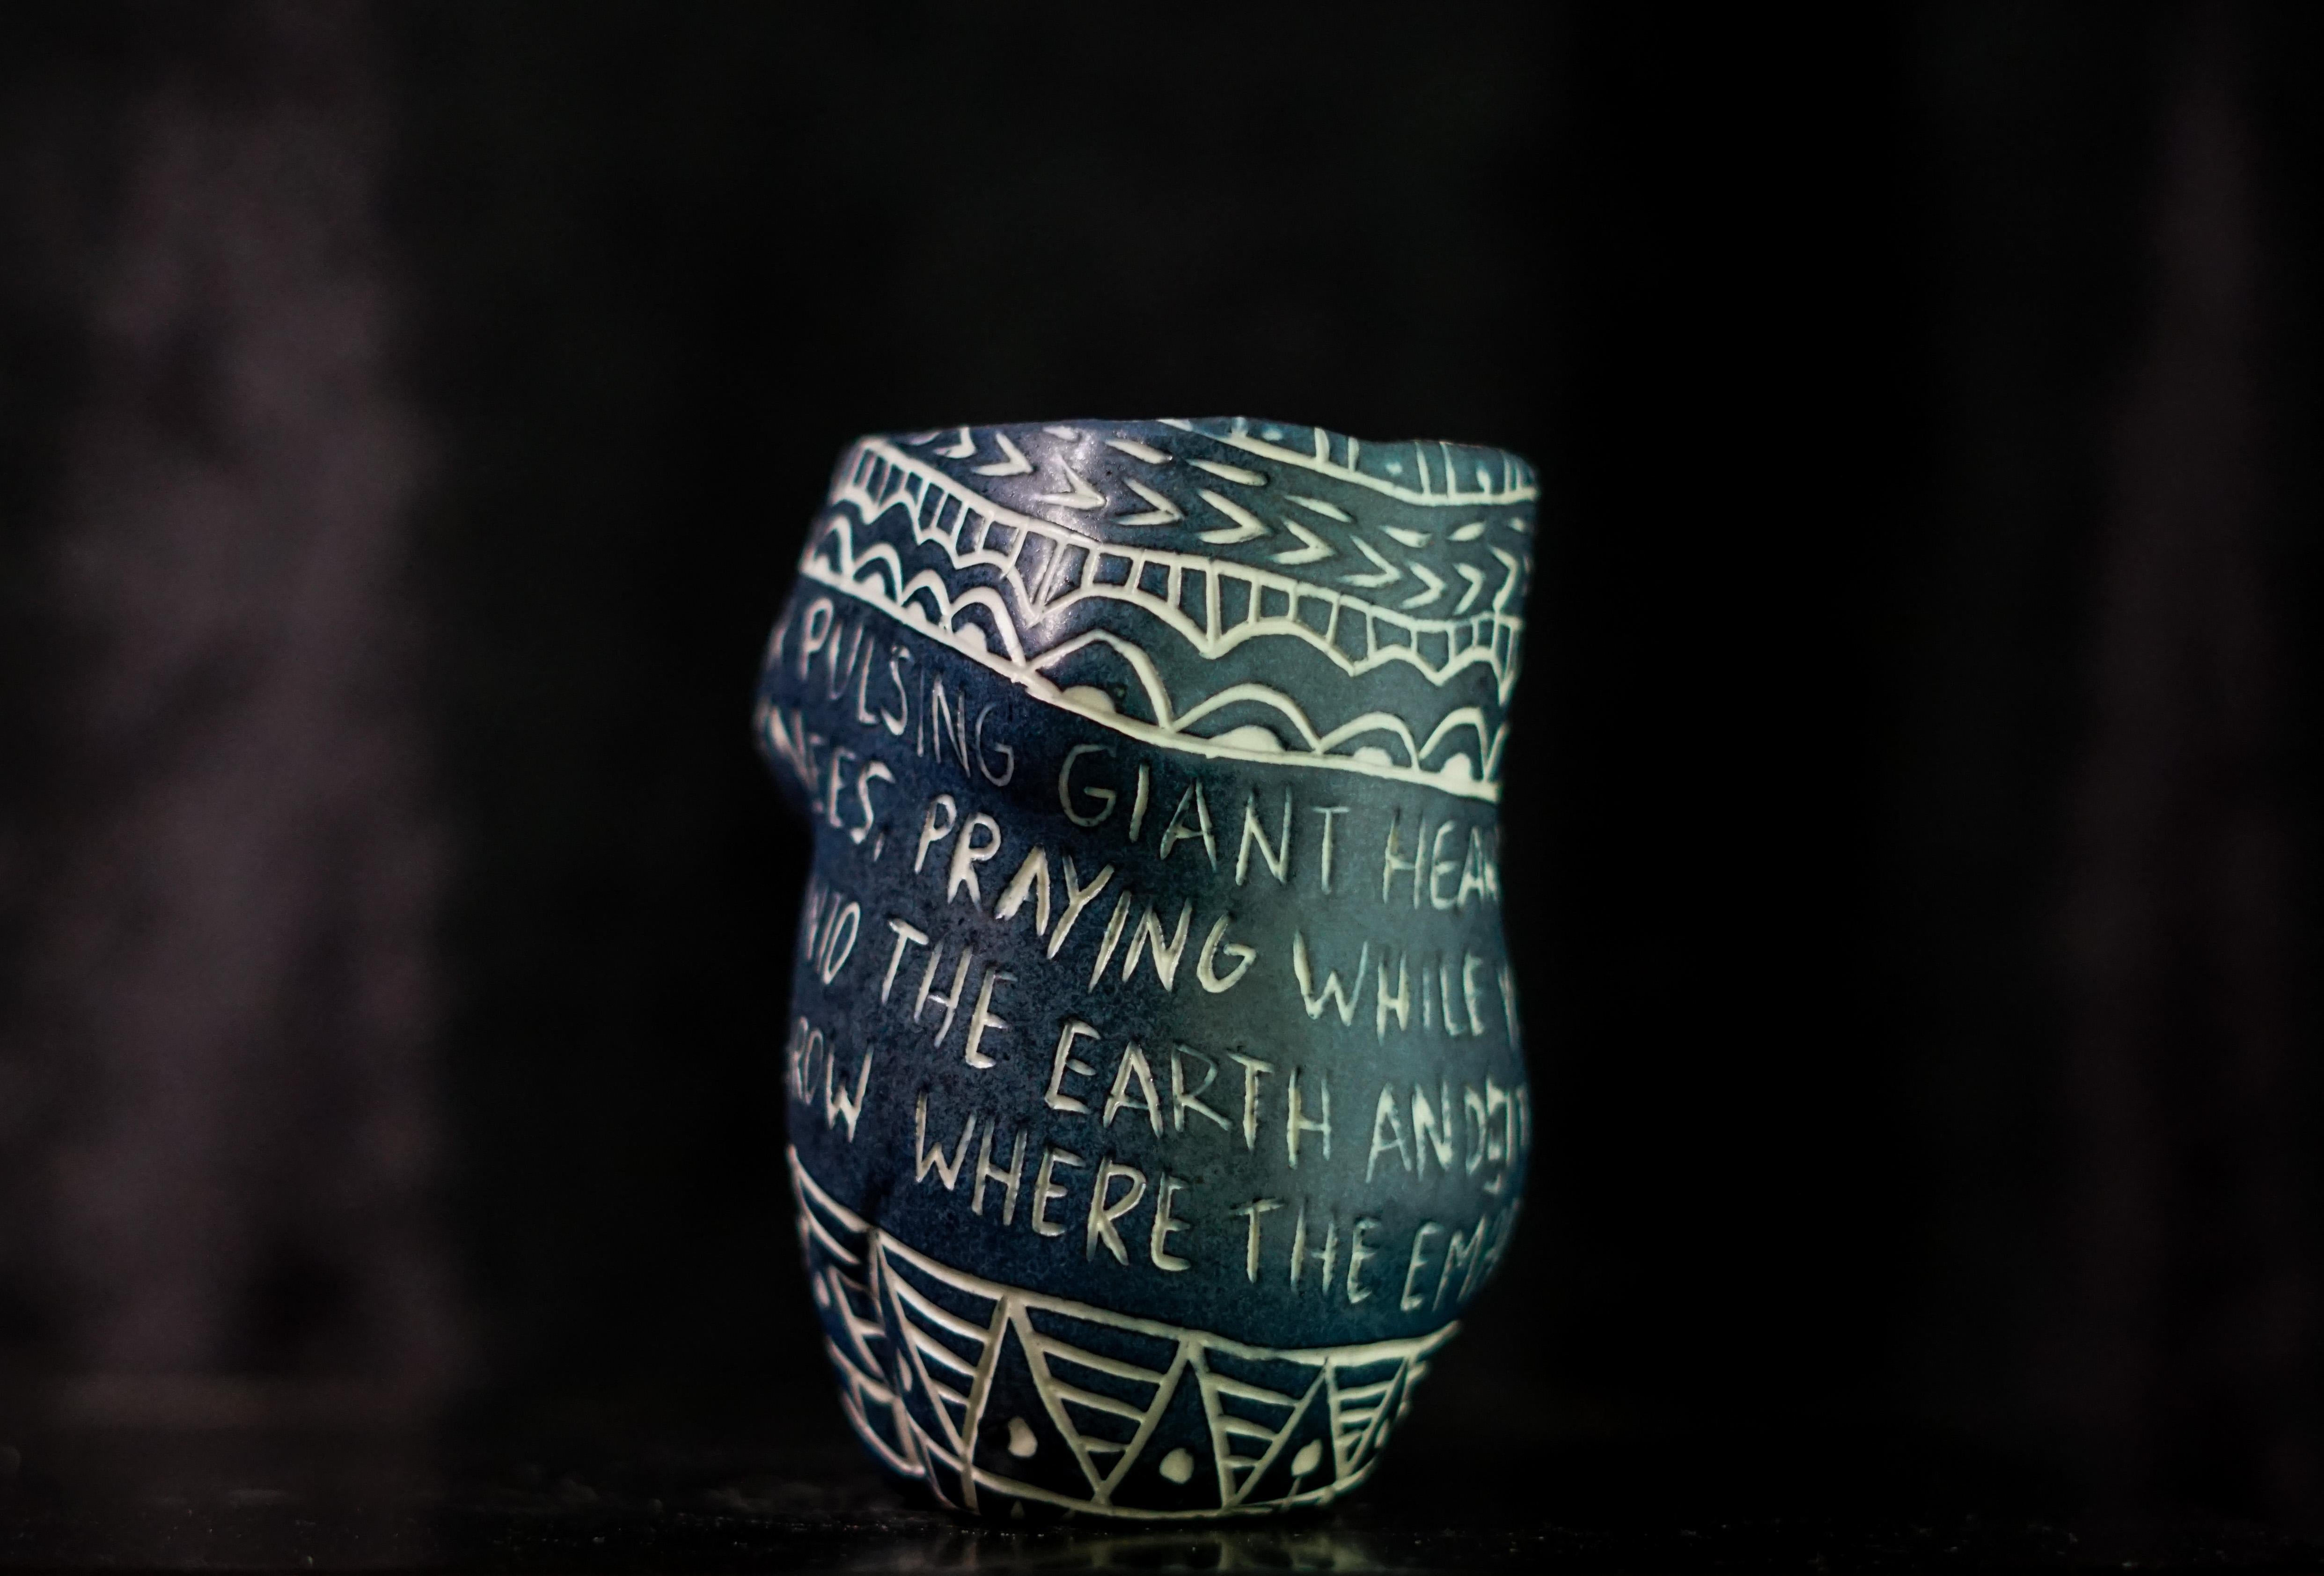 “Your Pulsing Giant Heart...” Porcelain cup with sgraffito detailing  - Modern Sculpture by Alex Hodge